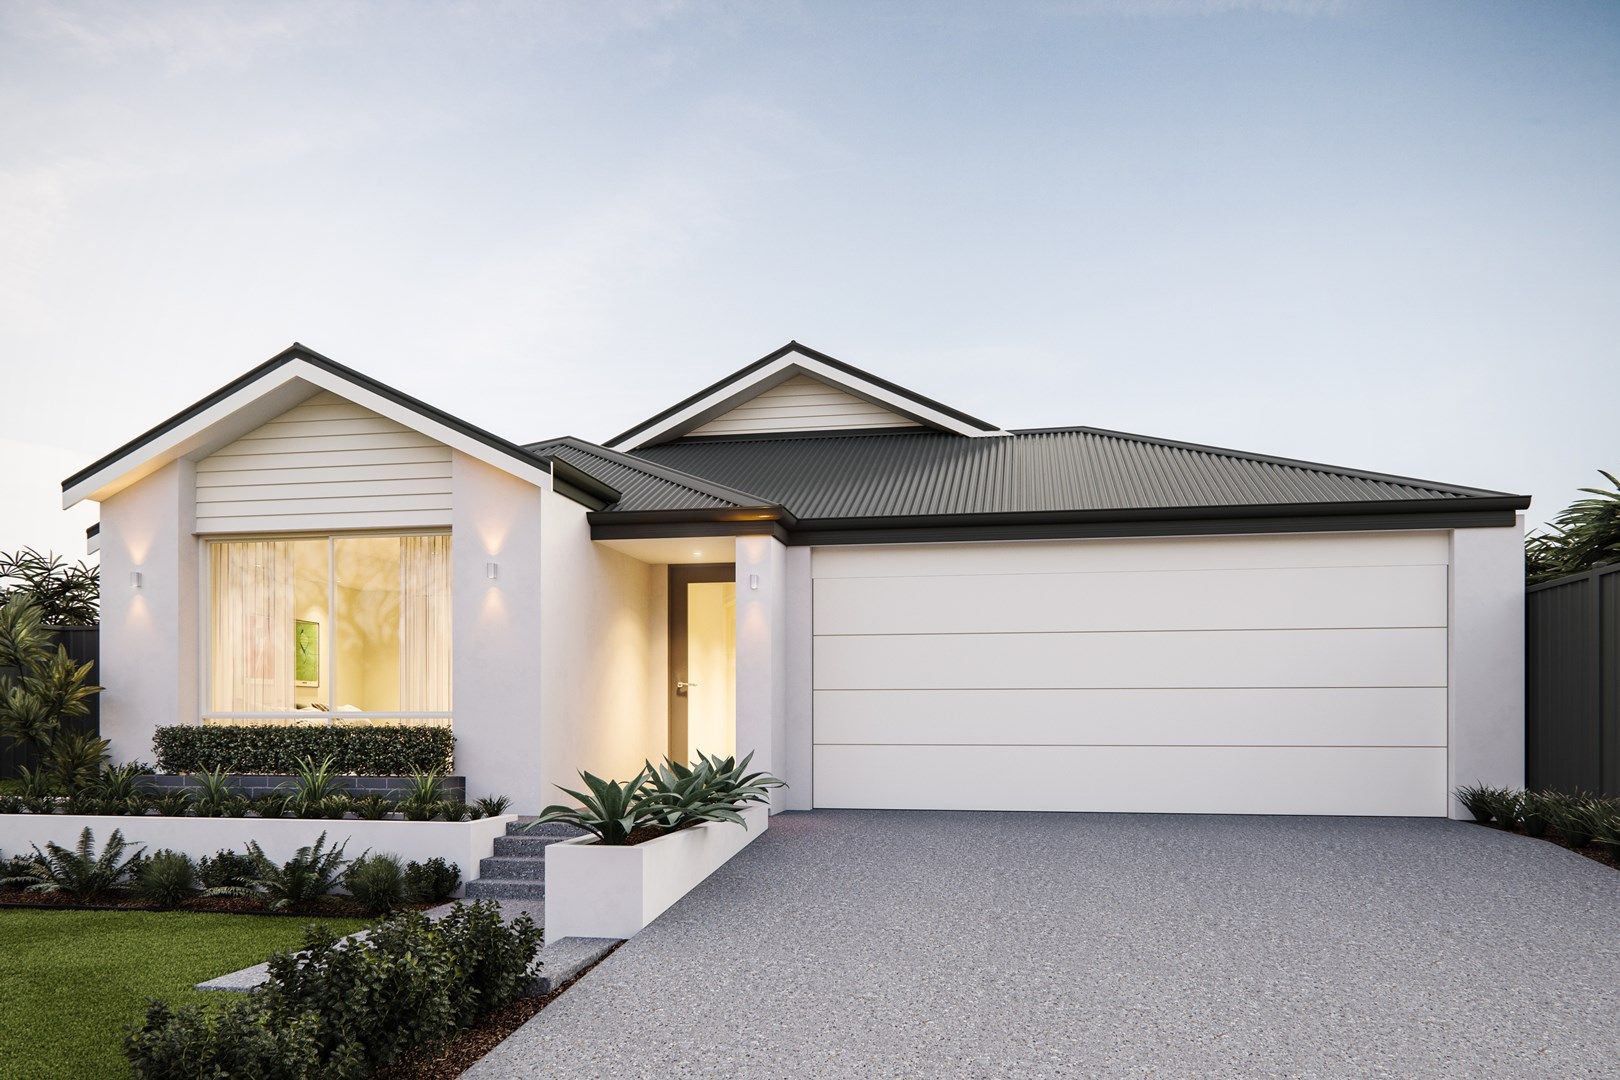 3 bedrooms New House & Land in Lot 1284 Lunarossa Drive TWO ROCKS WA, 6037